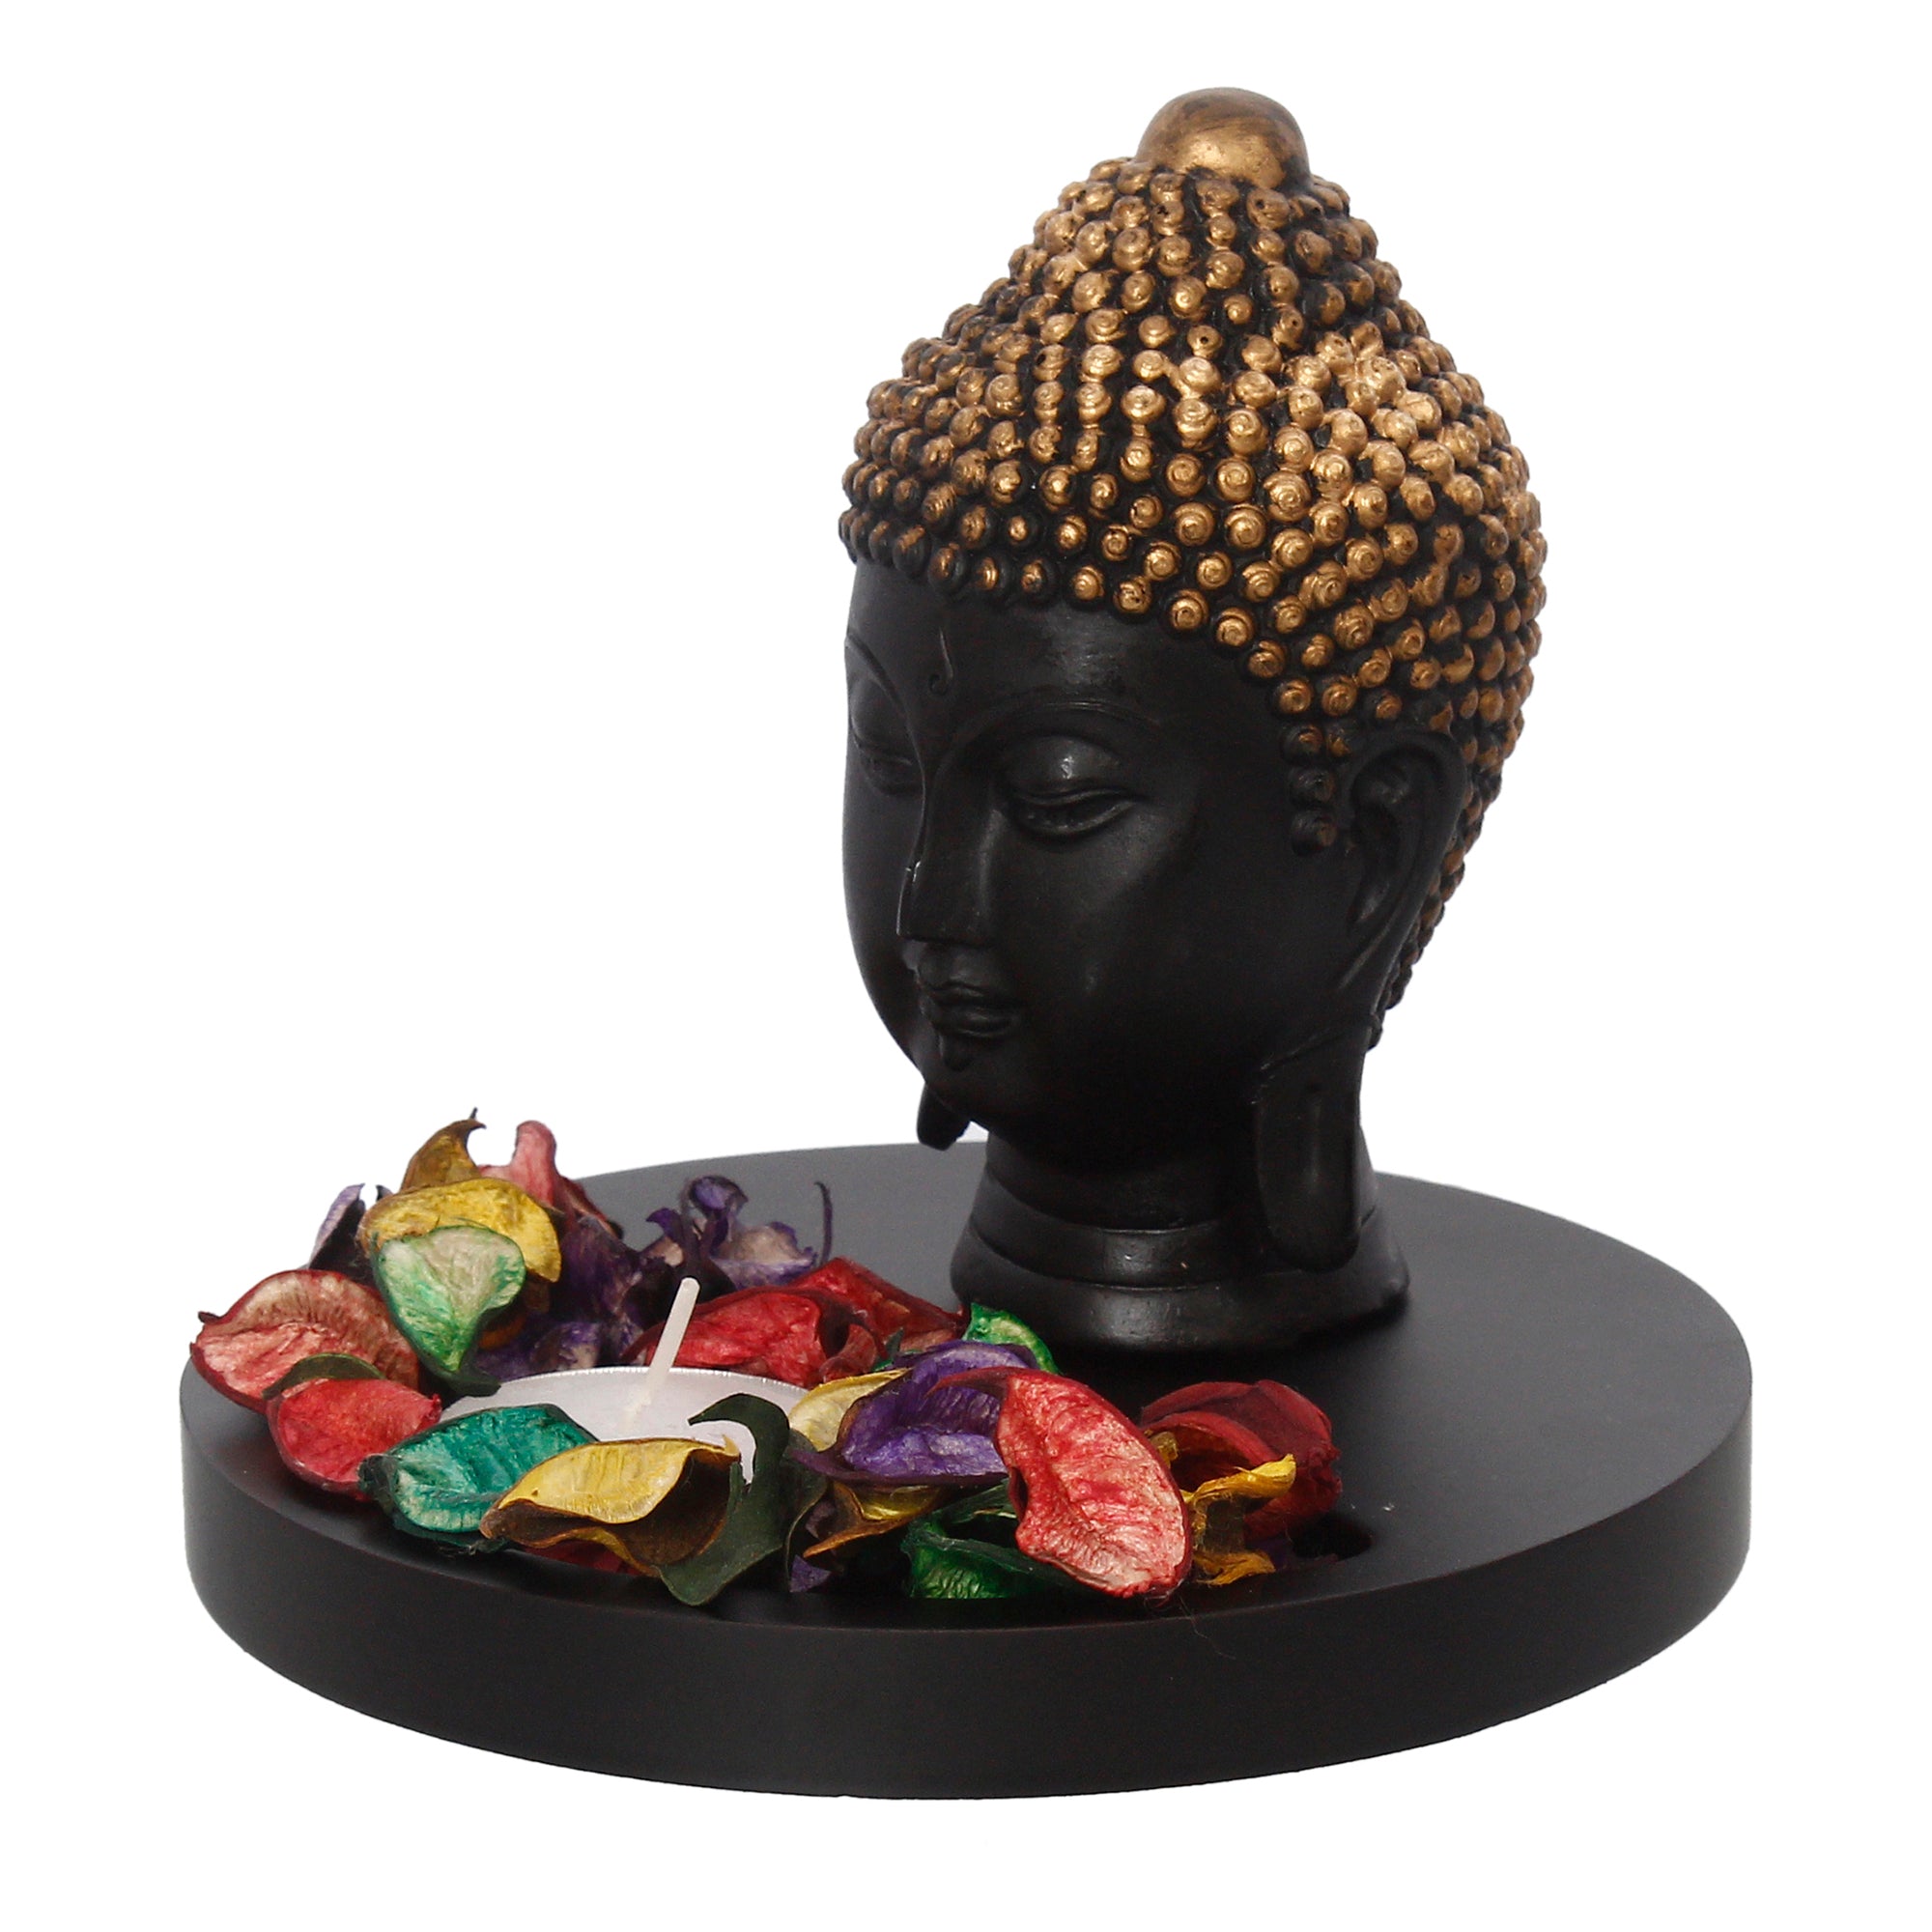 Decorative Black and Golden Buddha Head Statue with Wooden Base, Fragranced Petals and Tealight 5